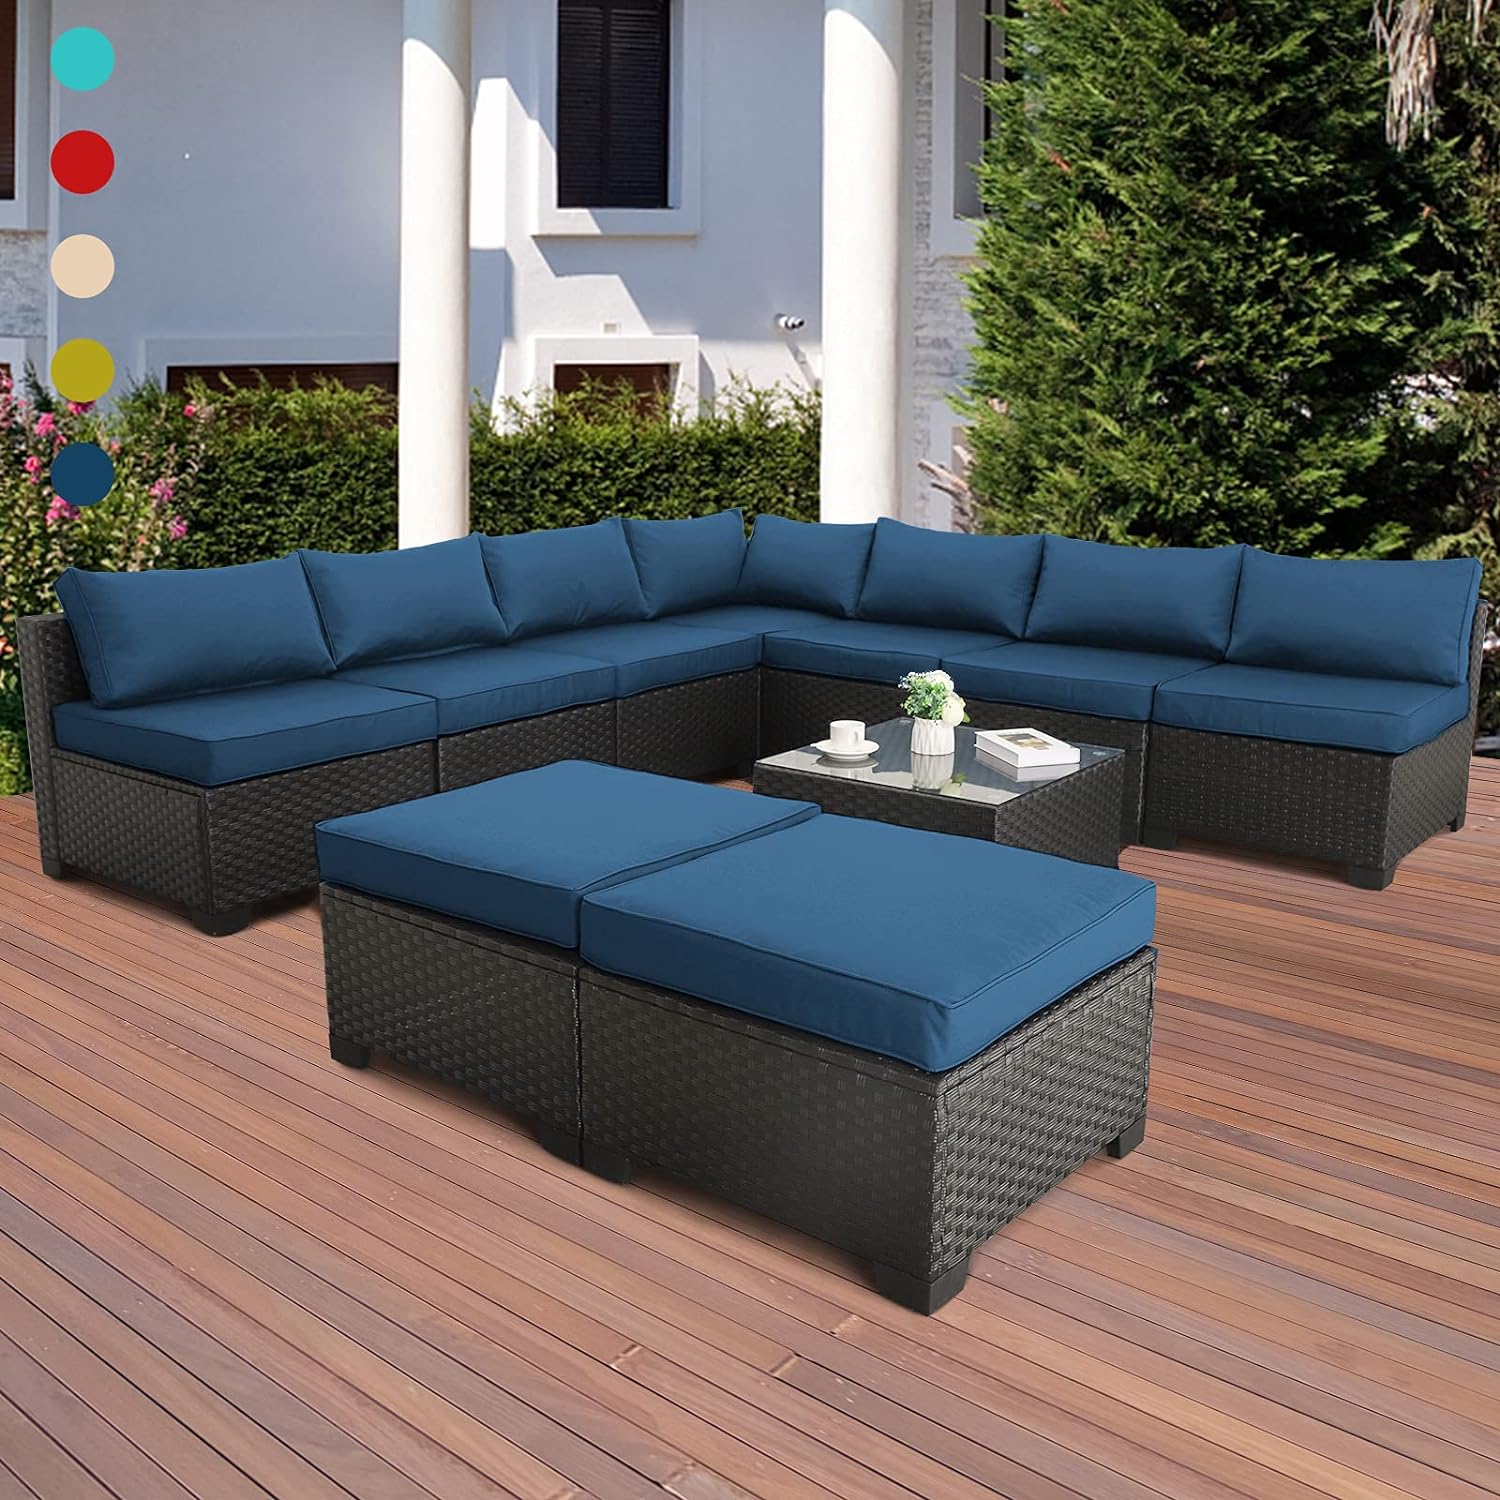 10 Pieces Patio Sectional Furniture Set Outdoor Wicker Conversation Sofa Couch with Blue Non-Slip Cushions Furniture Cover Black PE Rattan